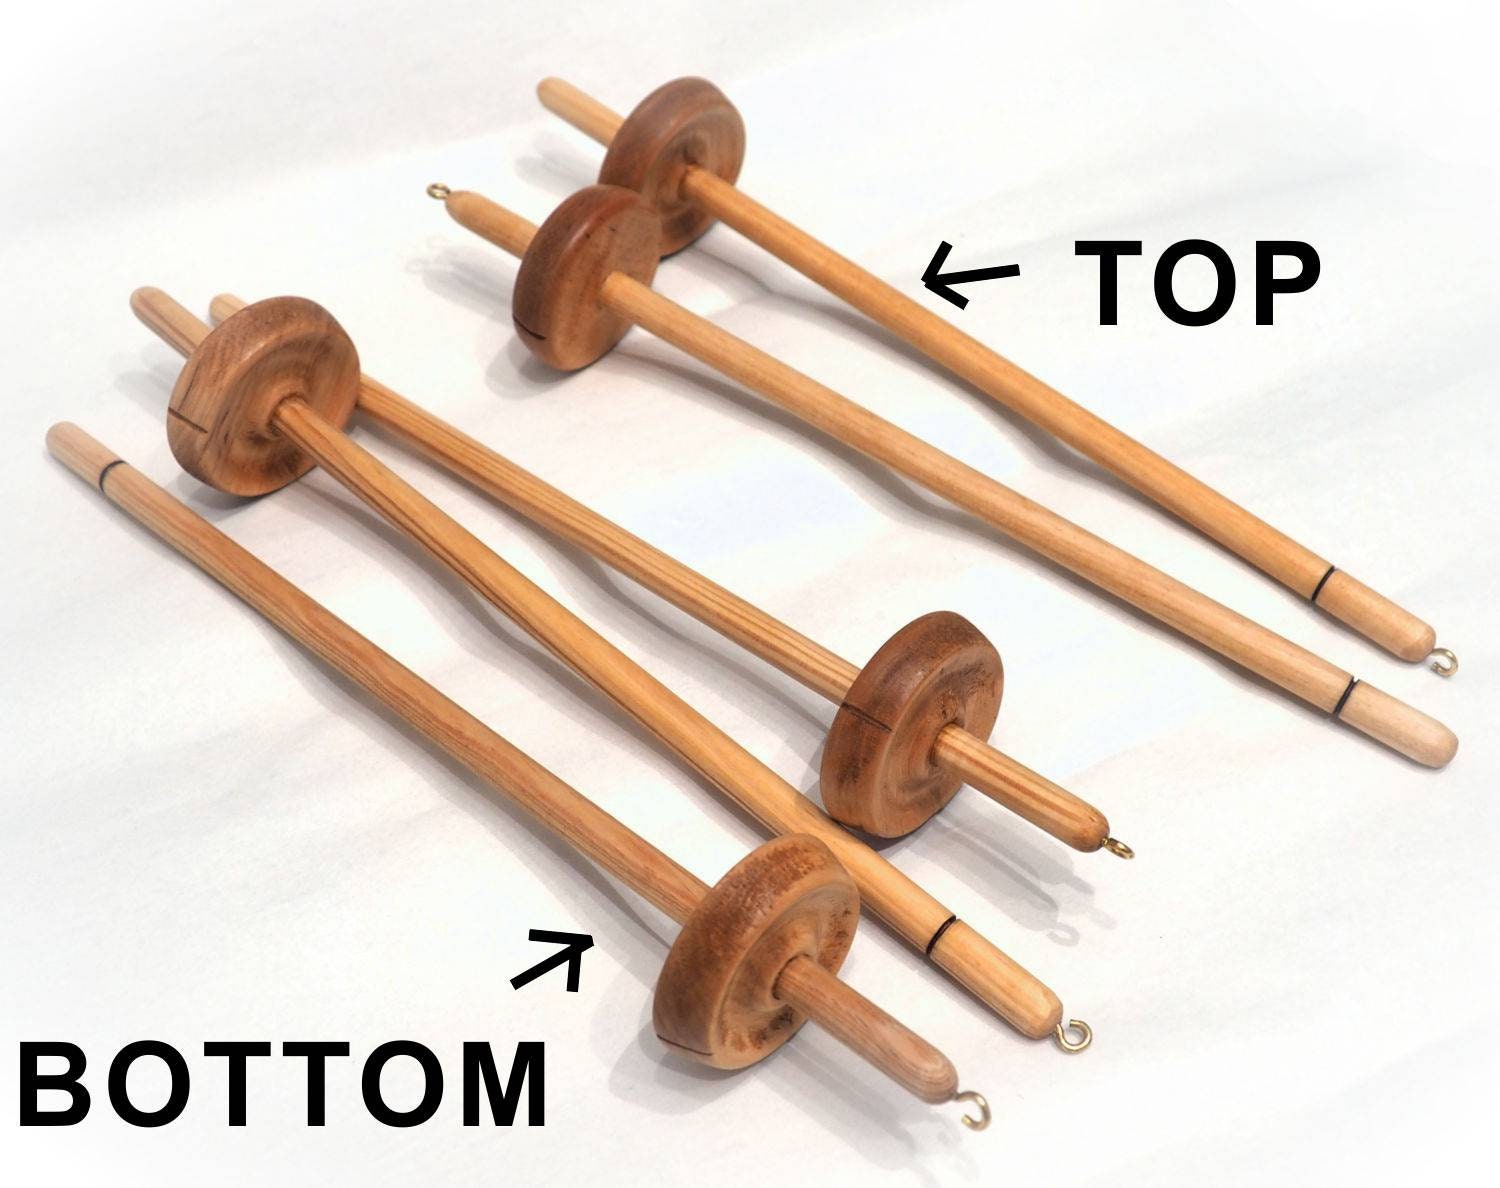 In My Lady's Chamber: Drop spindles? Part 1 - what are they? where